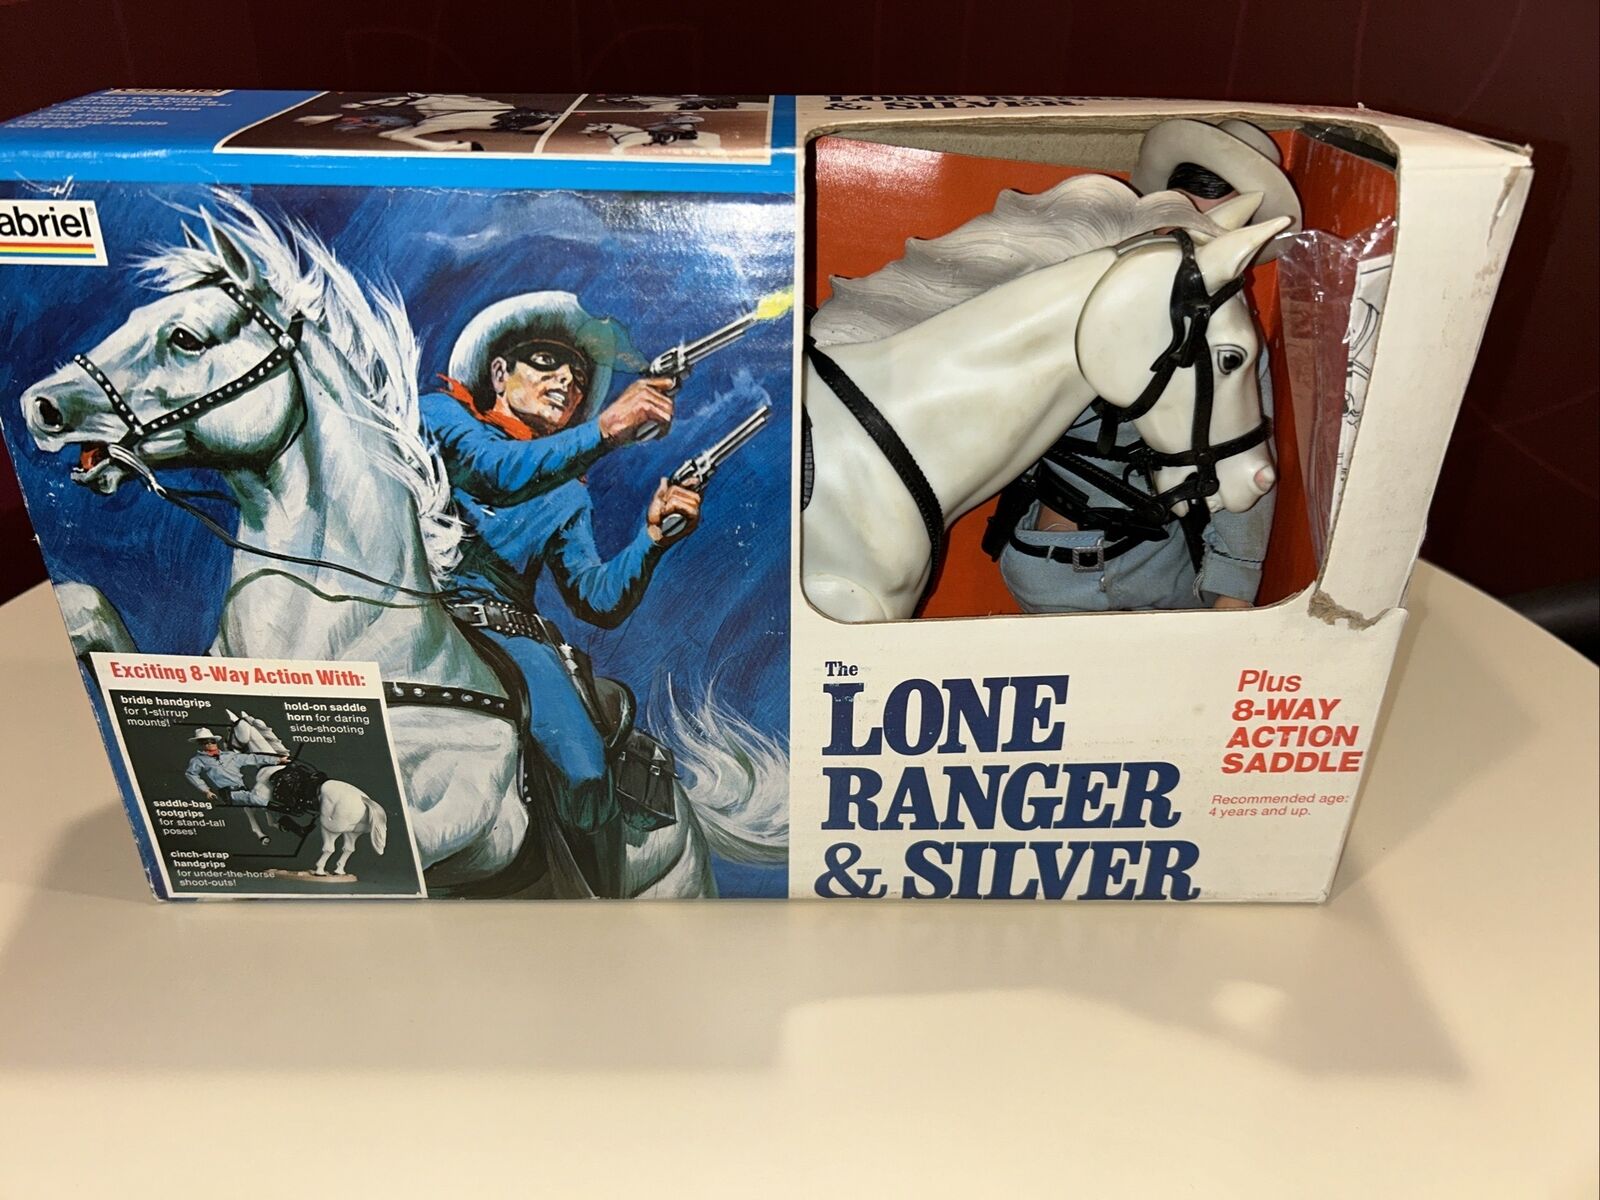 The Lone Ranger & Silver Figure New Opened Box Gabriel 1977 Accessories